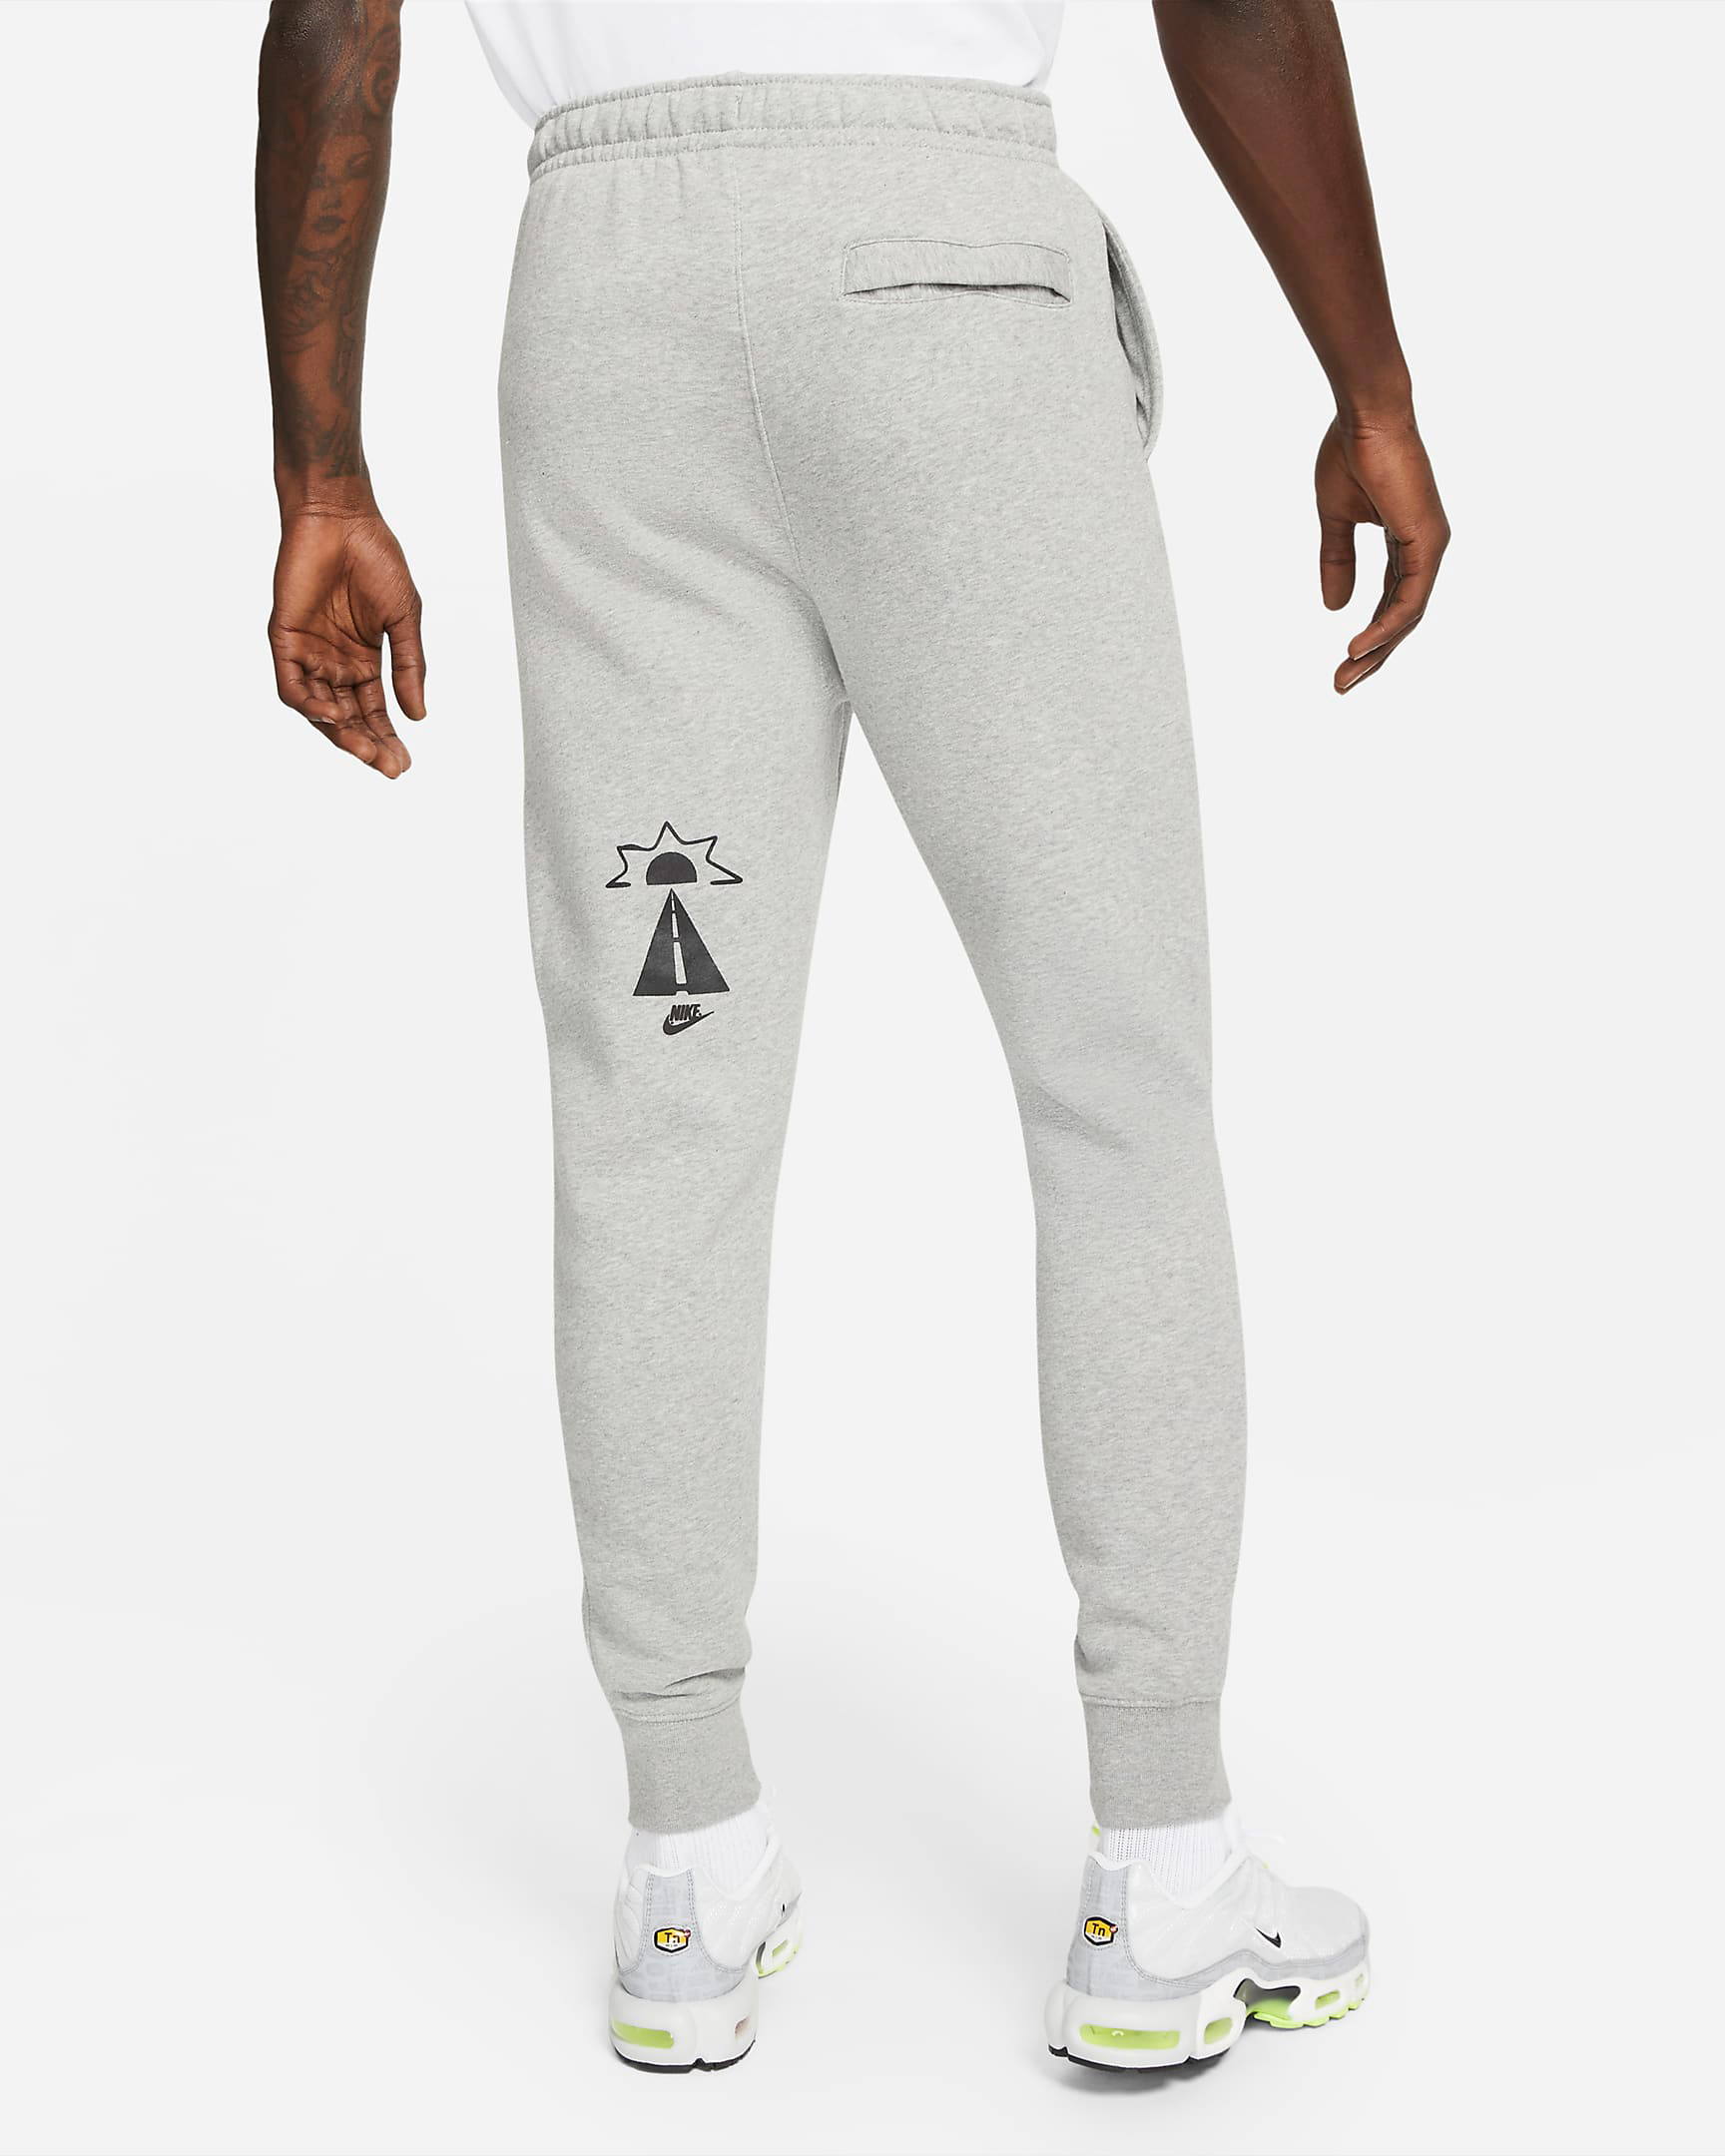 nike-go-the-extra-smile-jogger-pants-grey-2